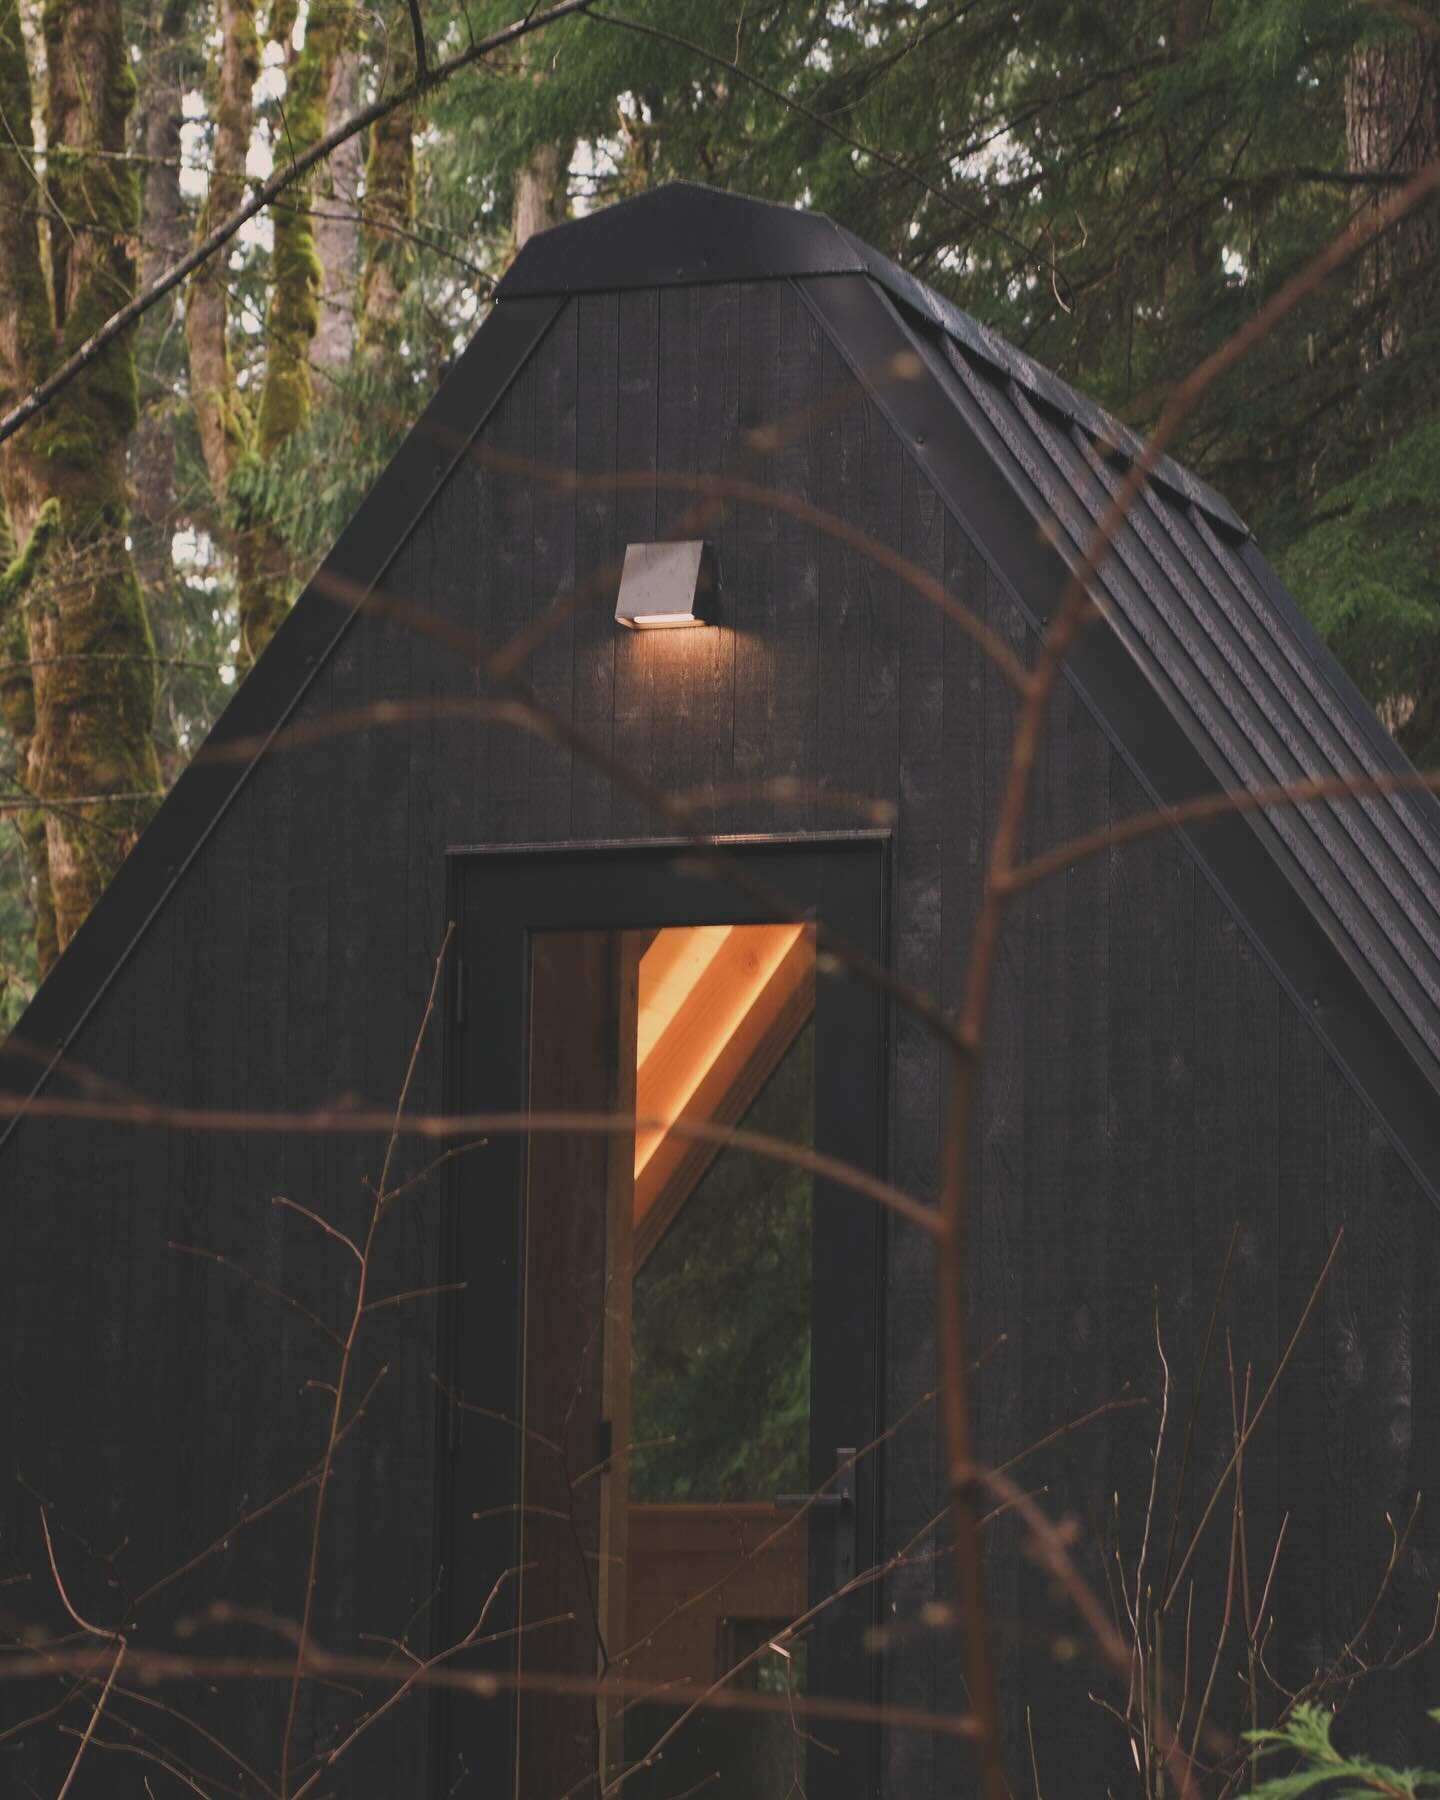 This little gem up in our local mountains @atthemckenziehouse #aframe #cabin